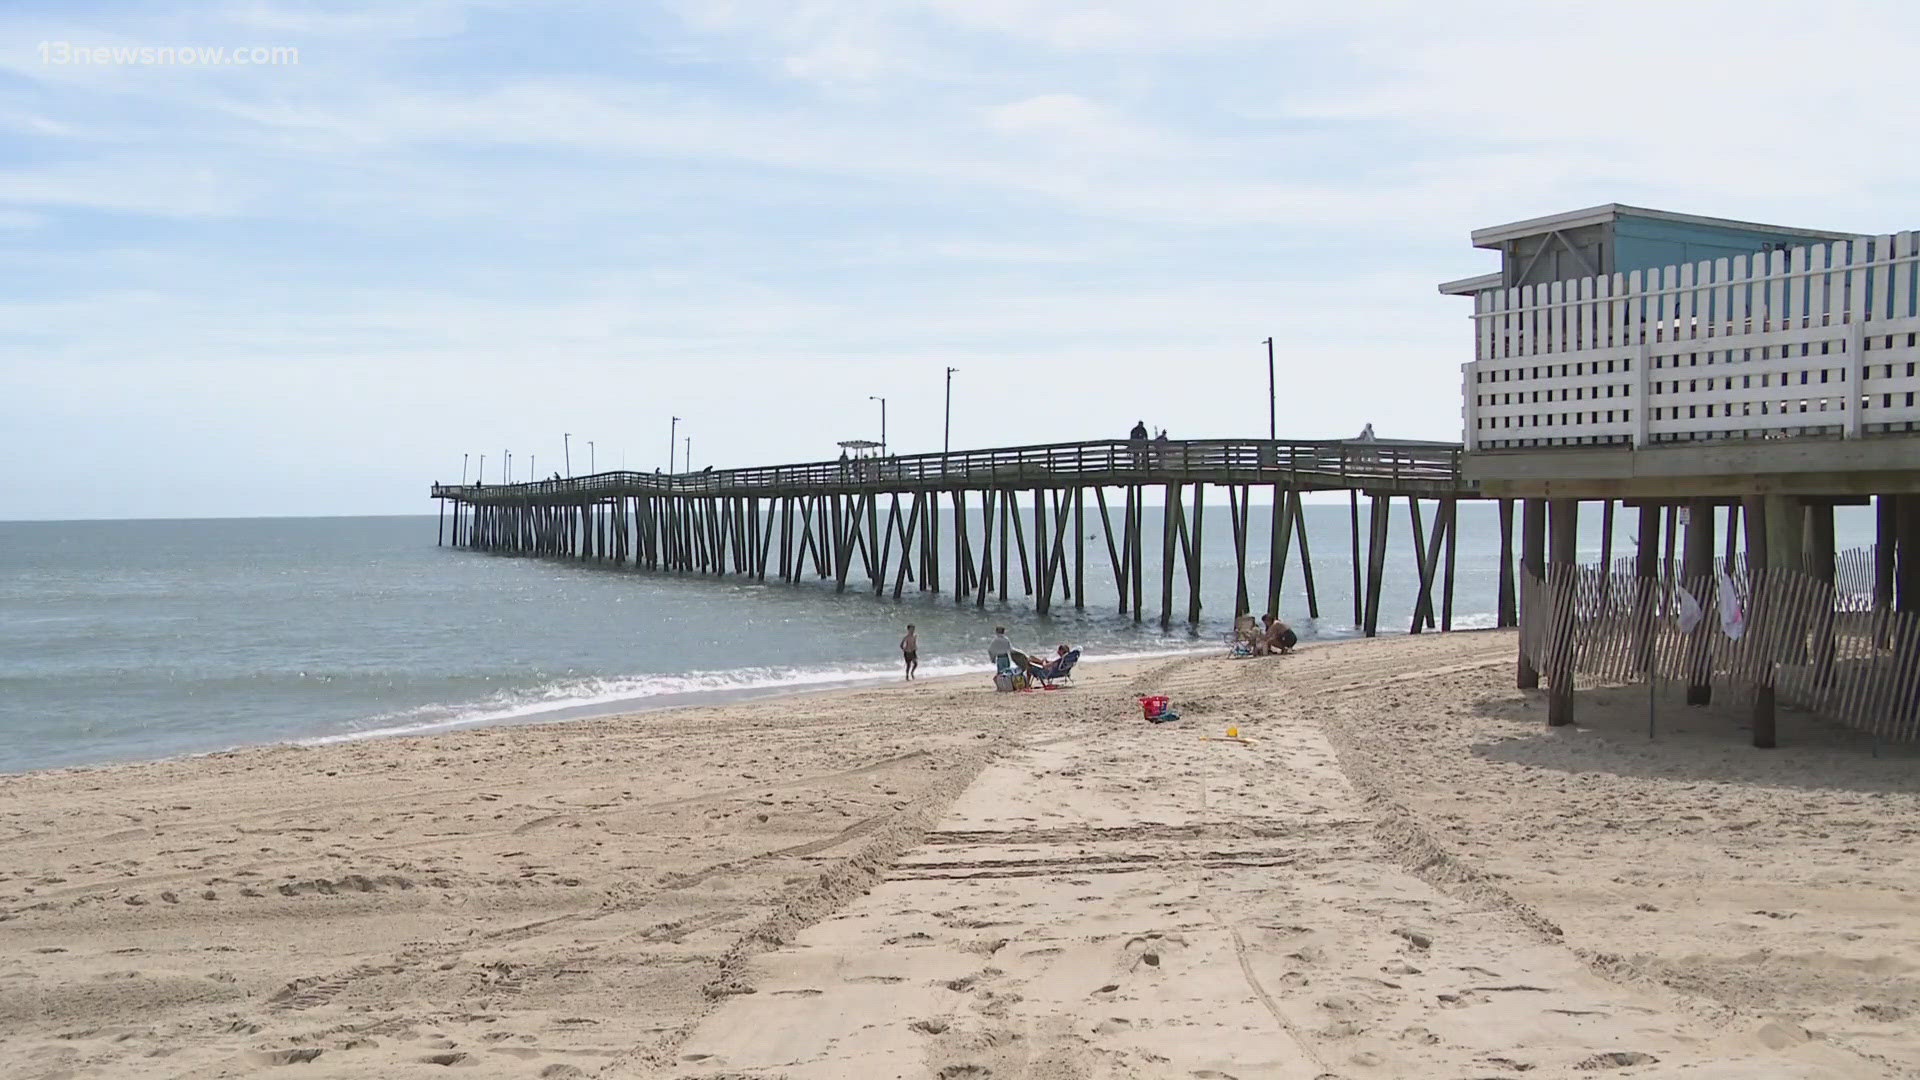 More than two months ago, a man drove off the end of the fishing pier on 14th Street.